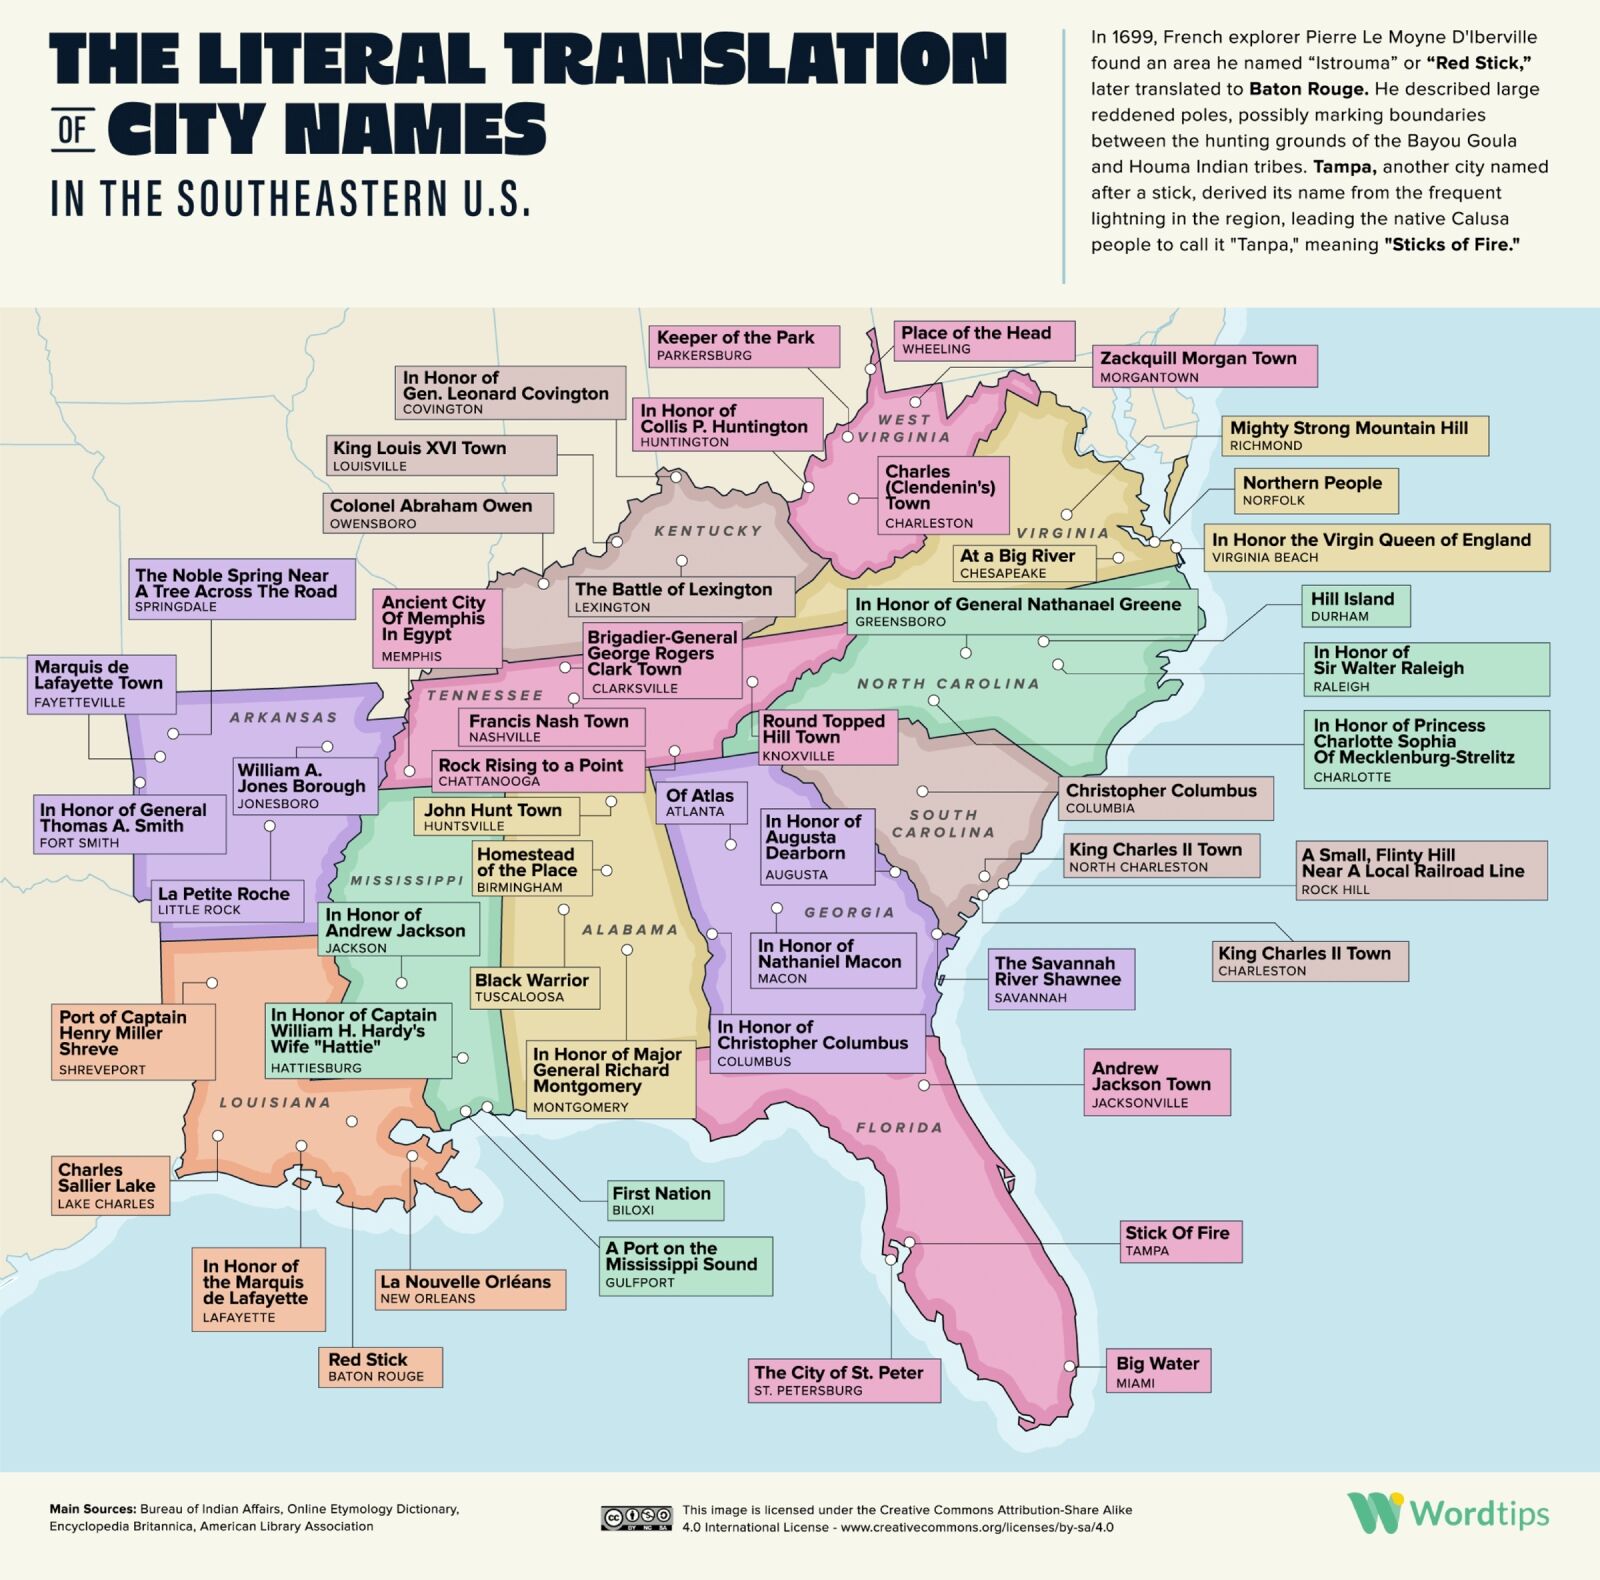 infographic of literal translation of southeast city names